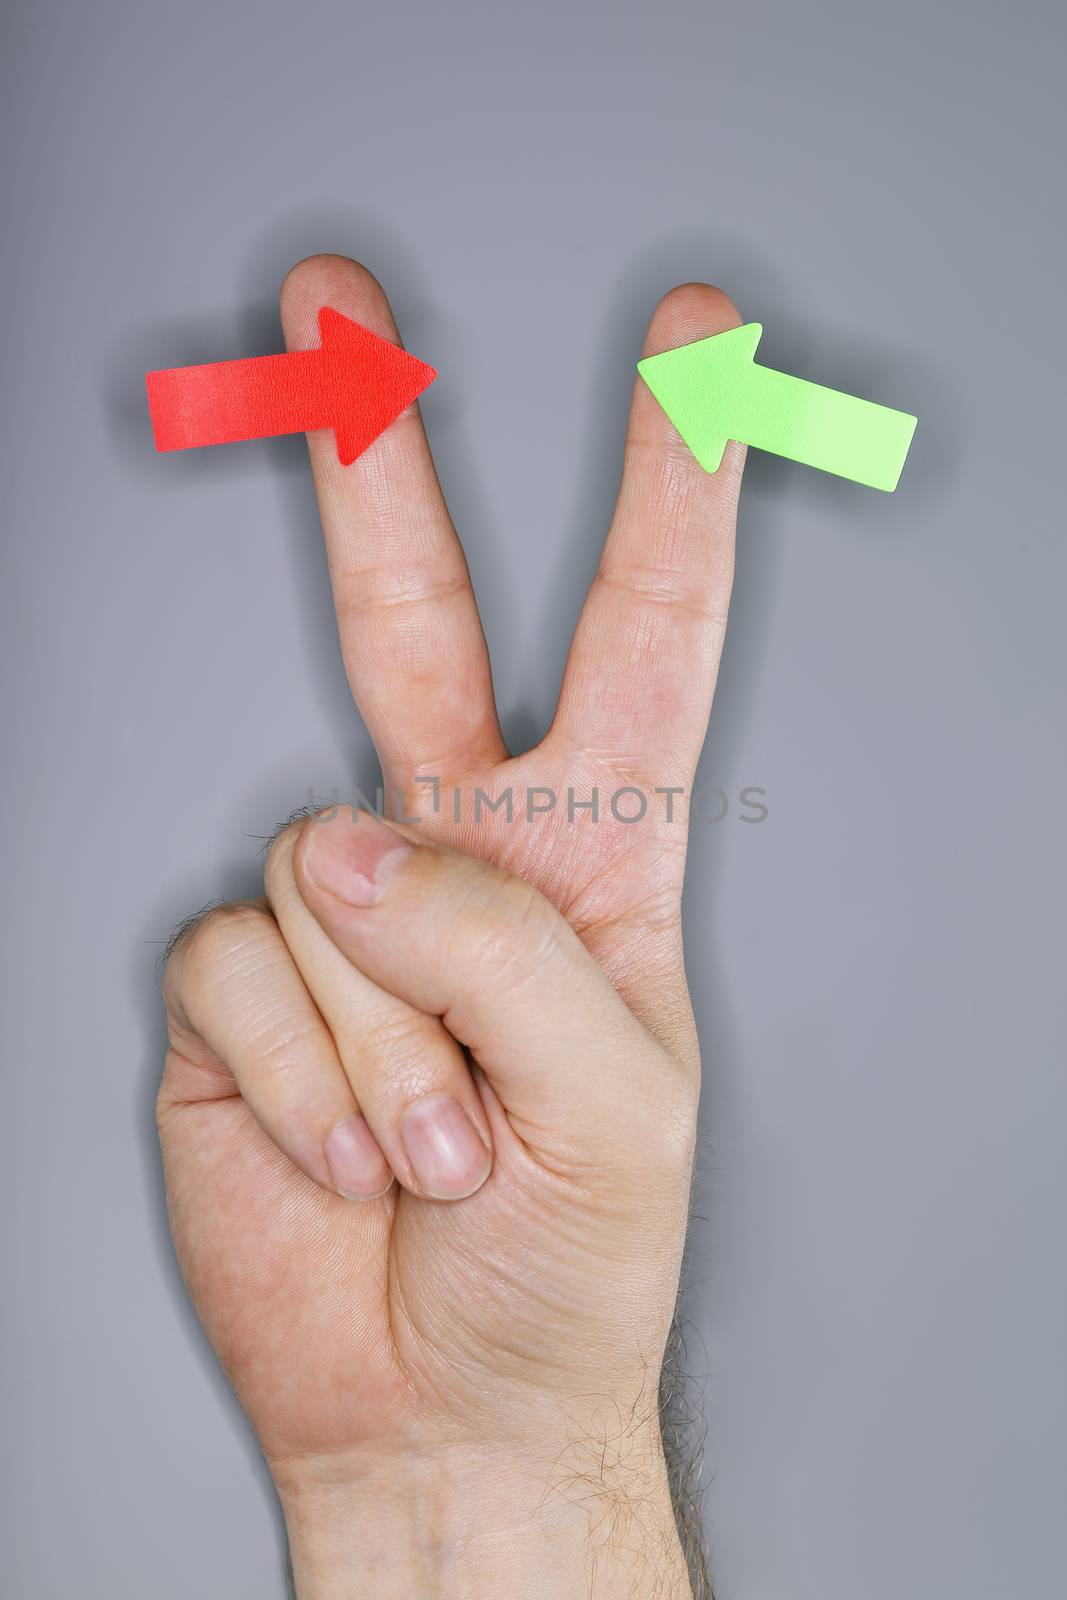 A hand with arrow stickers. Very short depth-of-field and ring flash lighting.